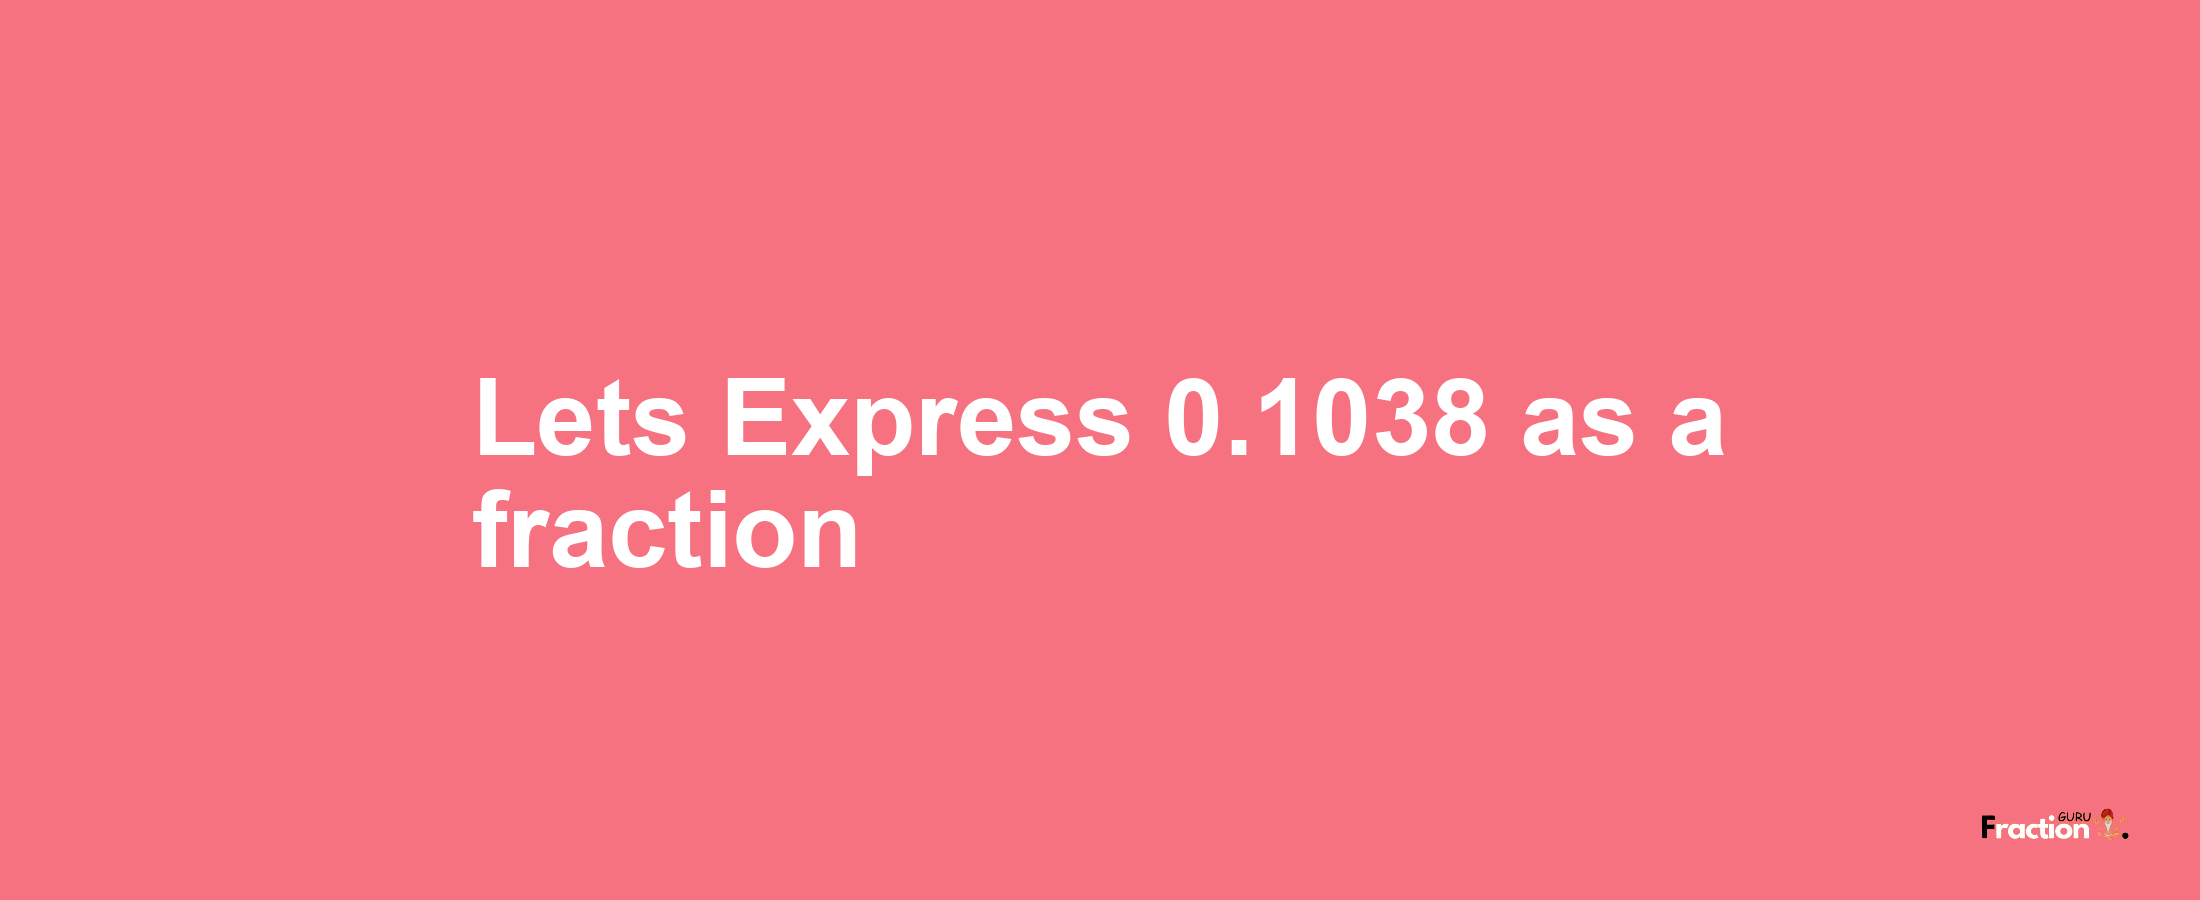 Lets Express 0.1038 as afraction